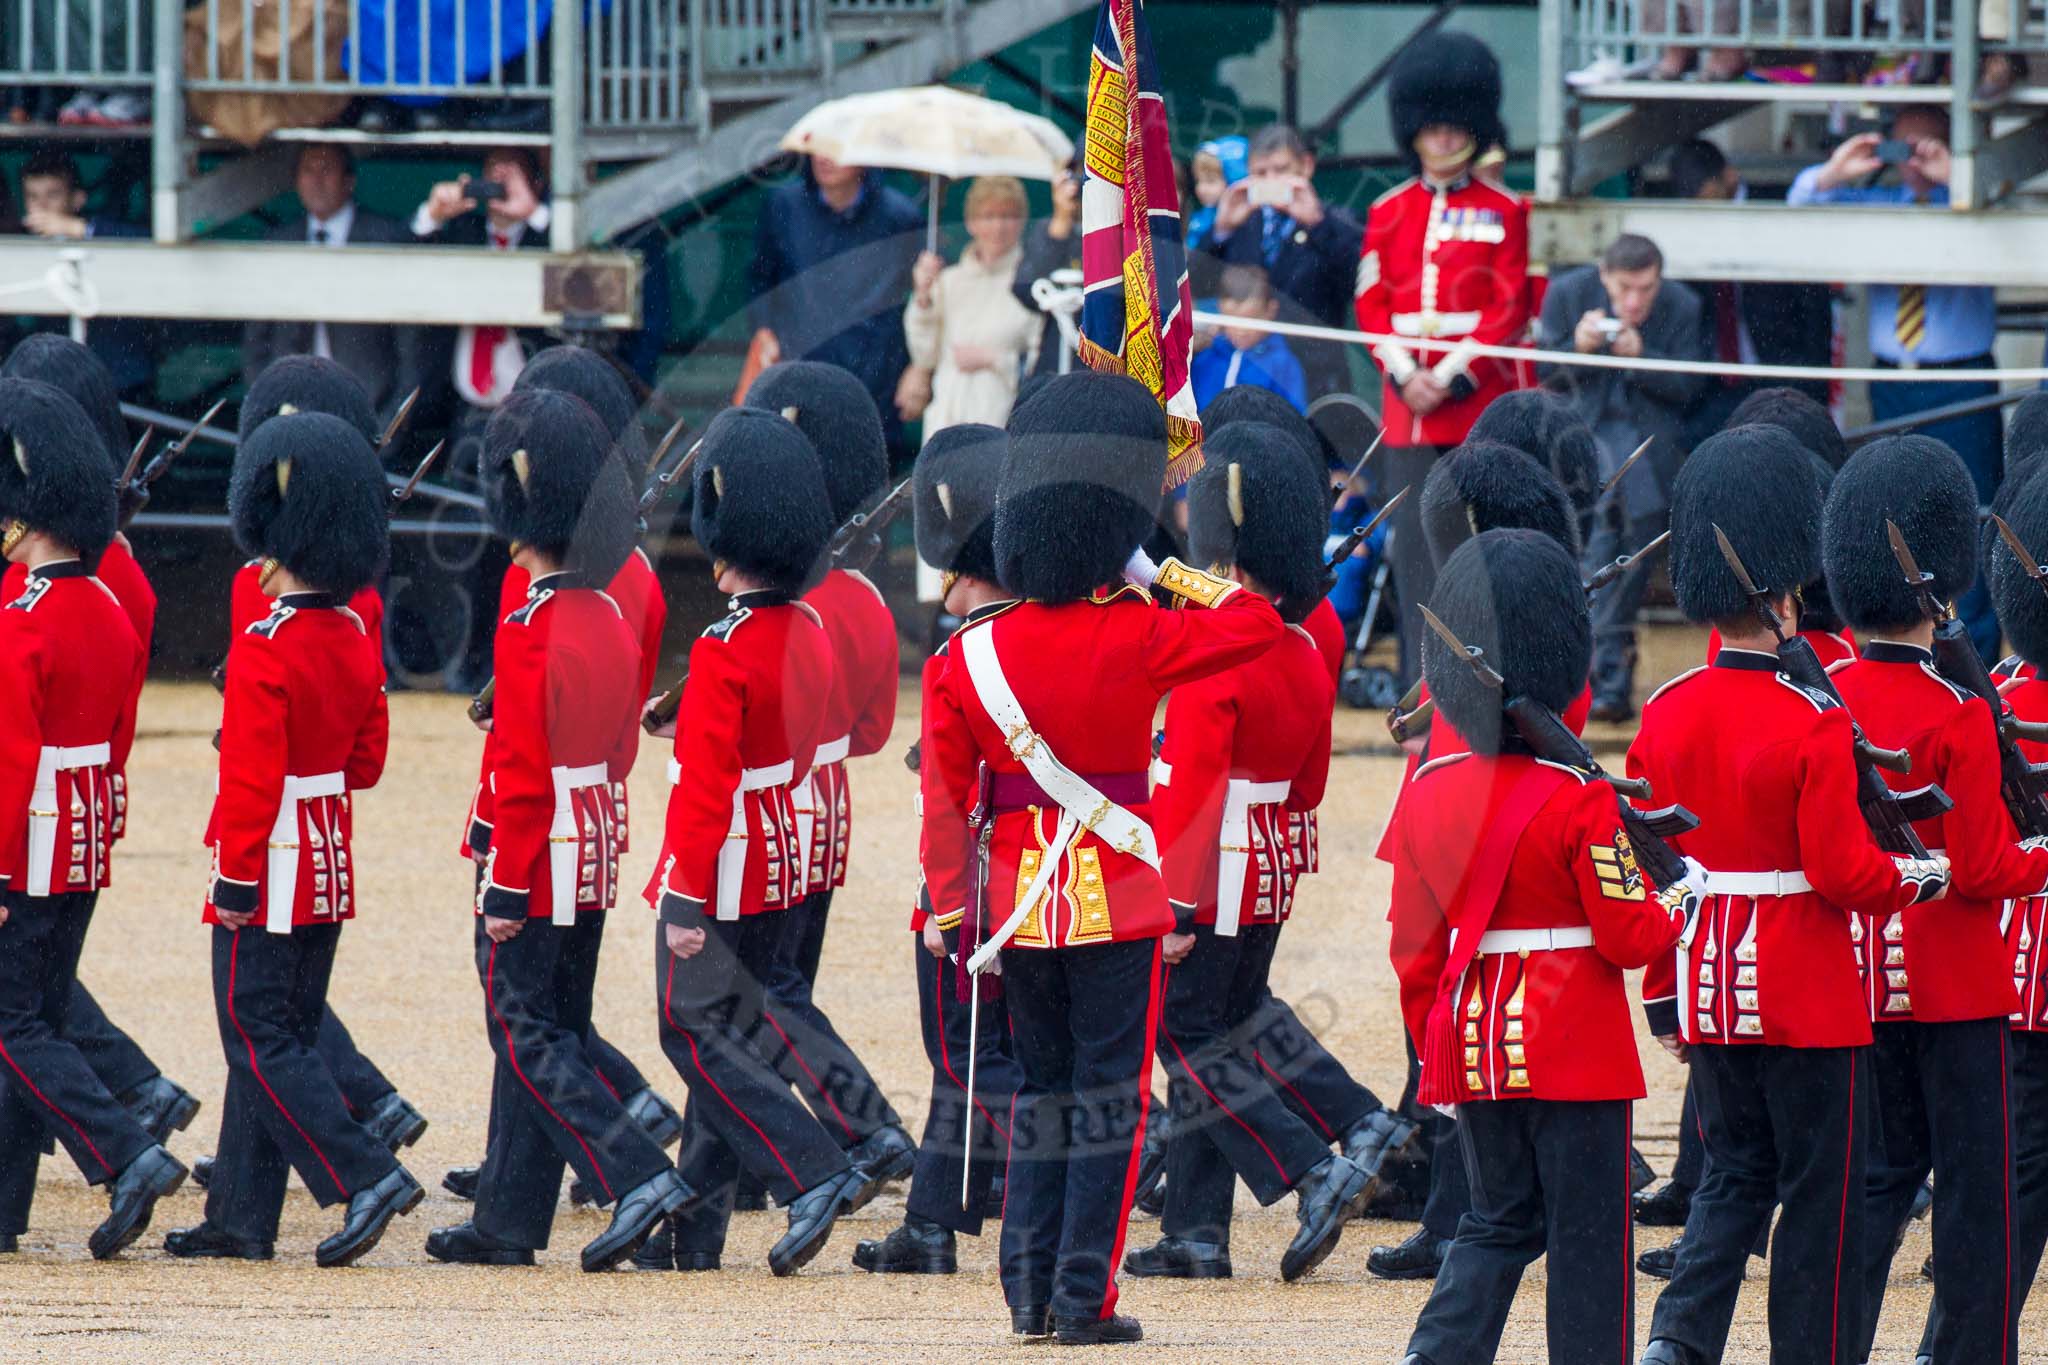 The Colonel's Review 2014.
Horse Guards Parade, Westminster,
London,

United Kingdom,
on 07 June 2014 at 11:22, image #418